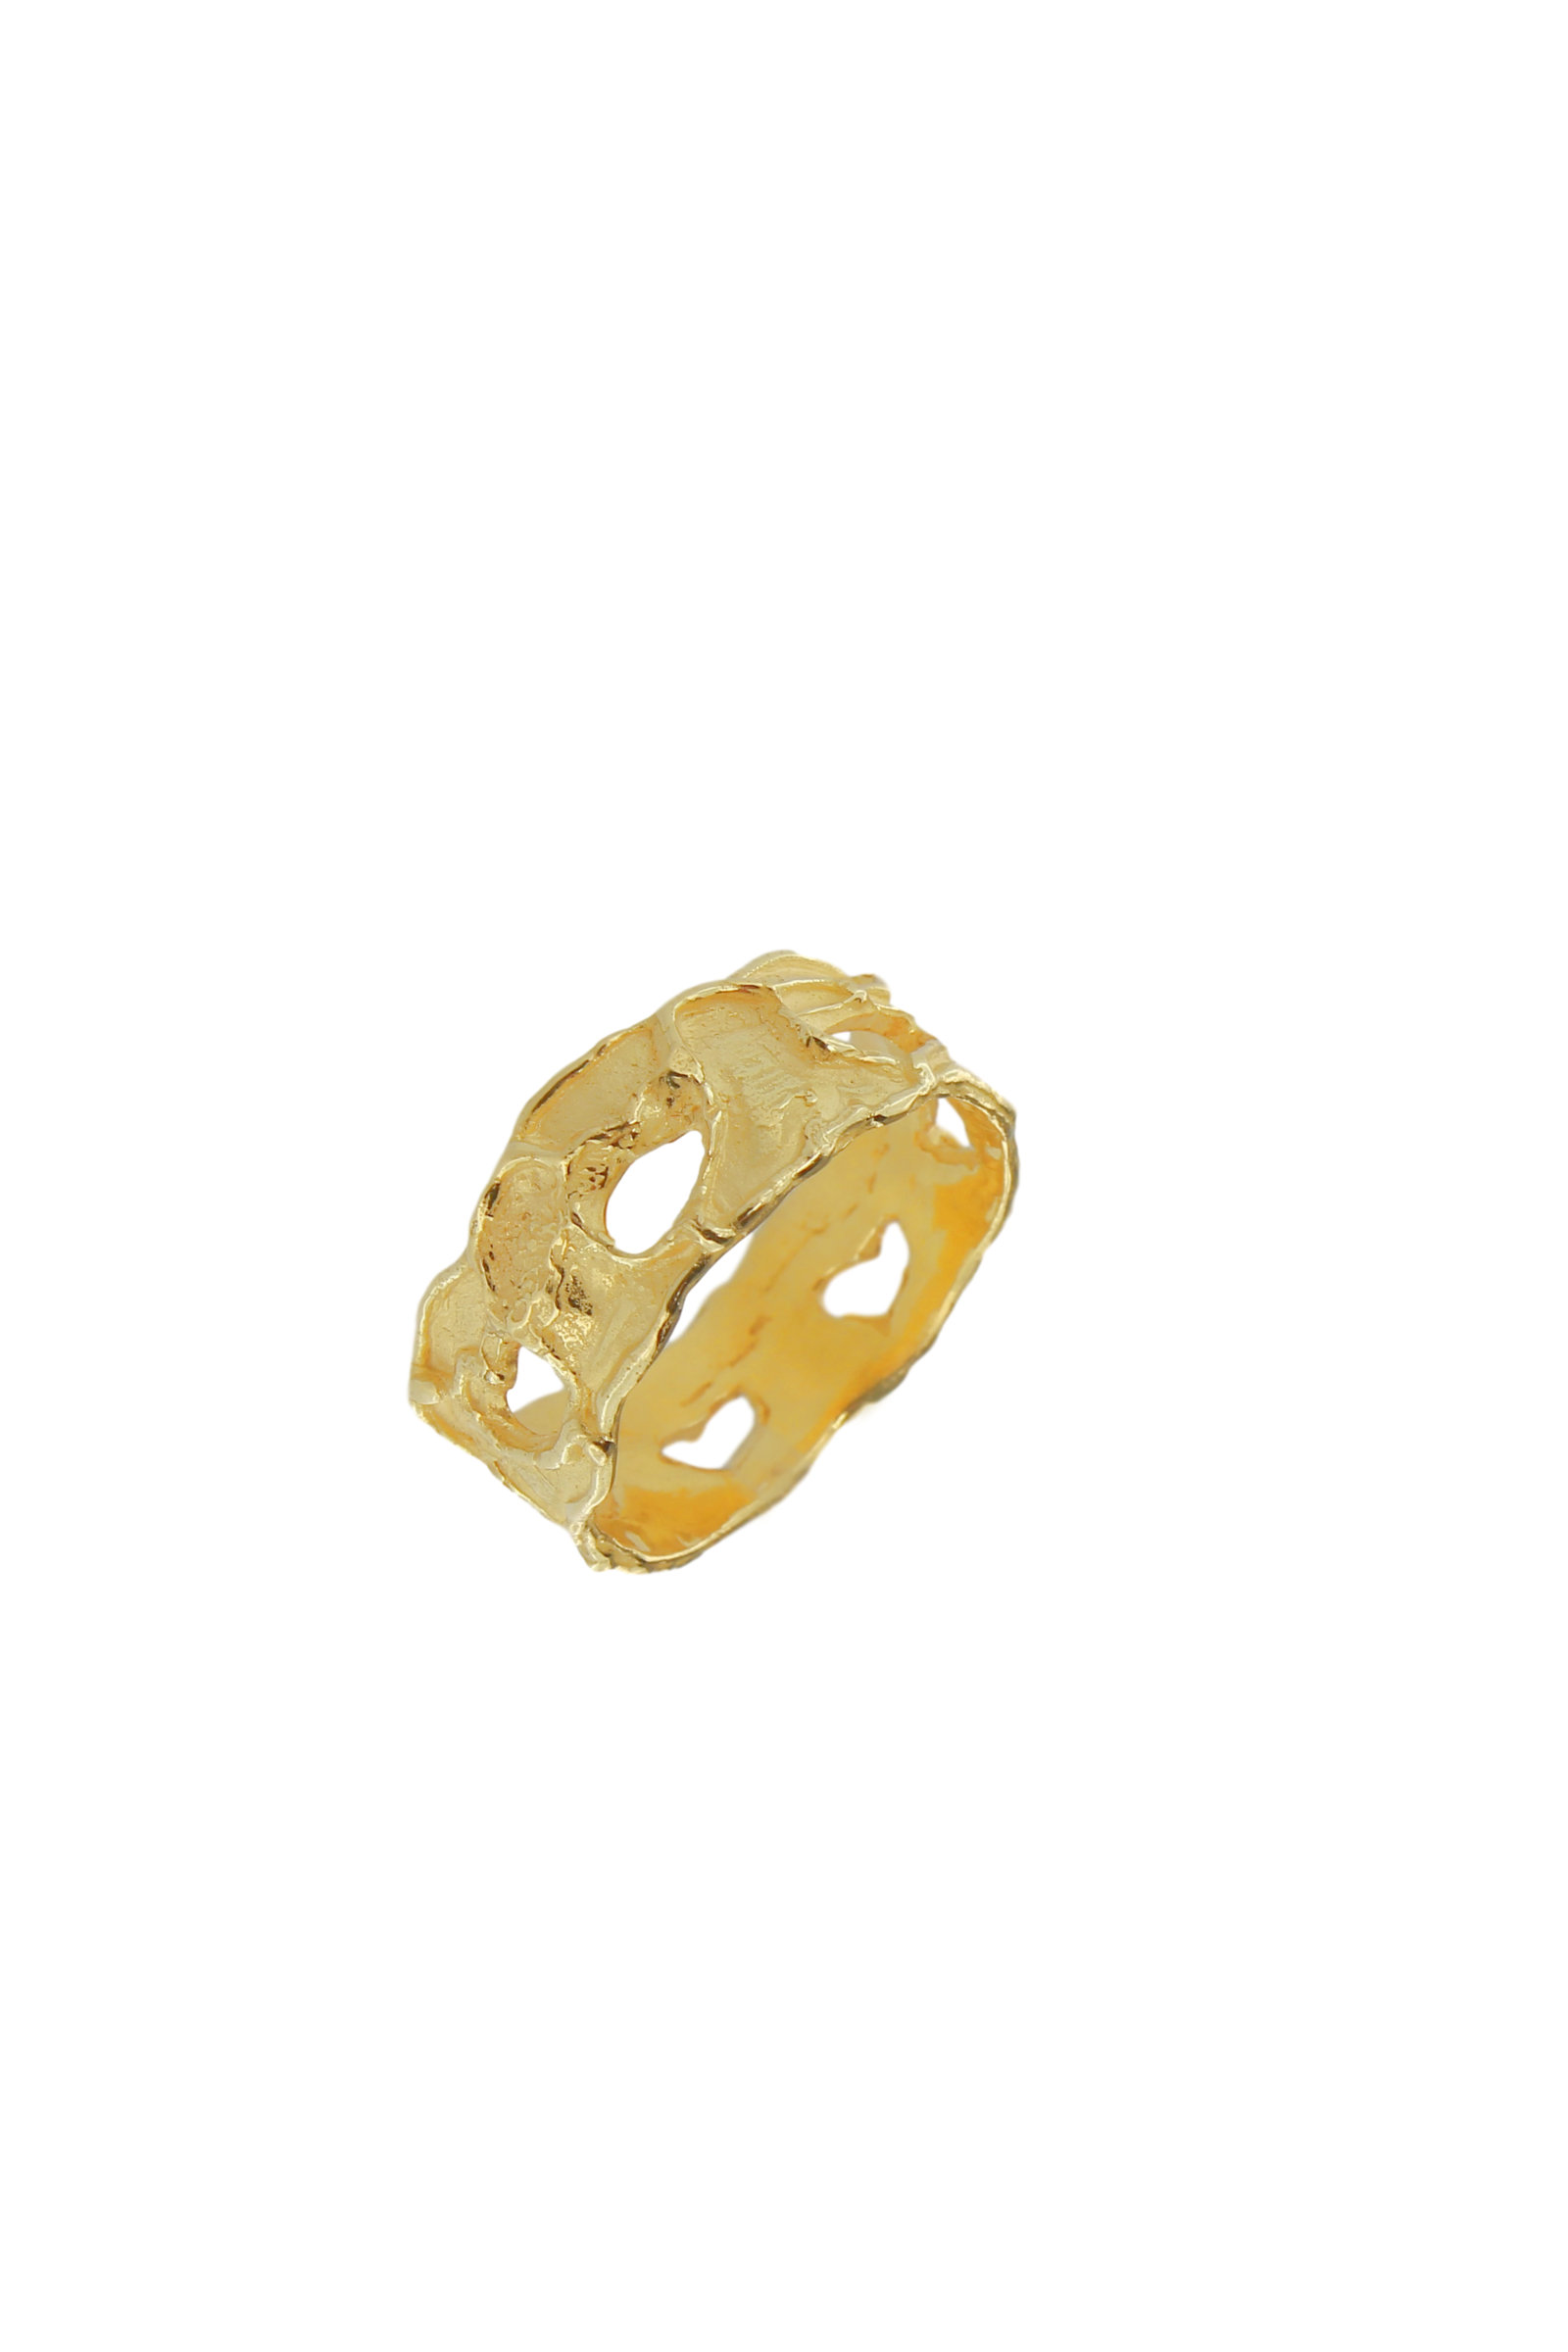 SE233C-18-Kt-Yellow-Gold-Band-Ring-1